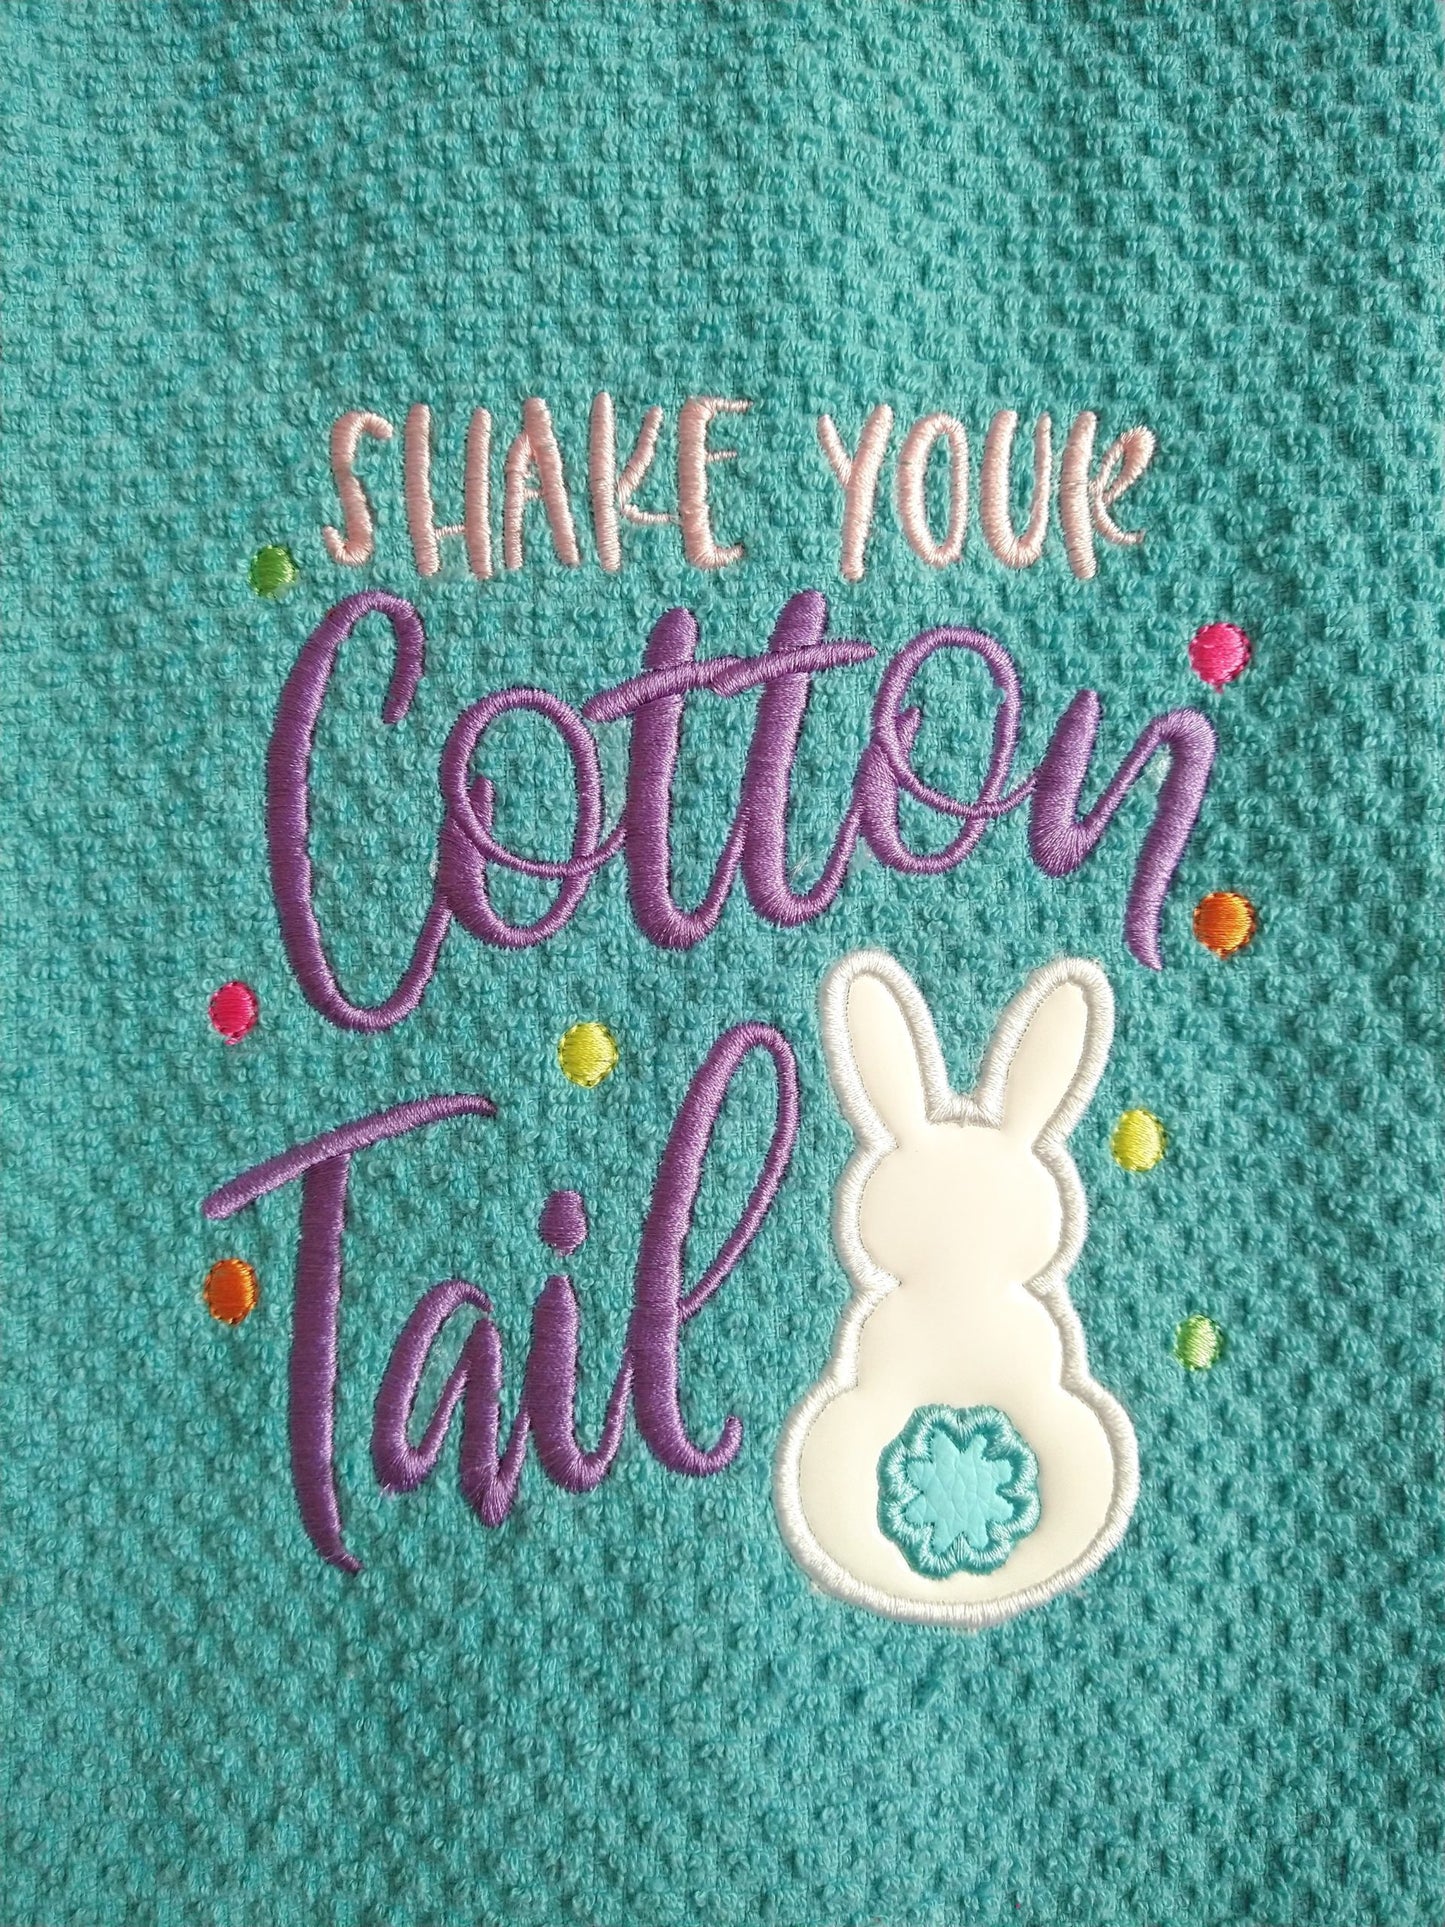 Shake Your Cotton Tail - 4 sizes- Digital Embroidery Design